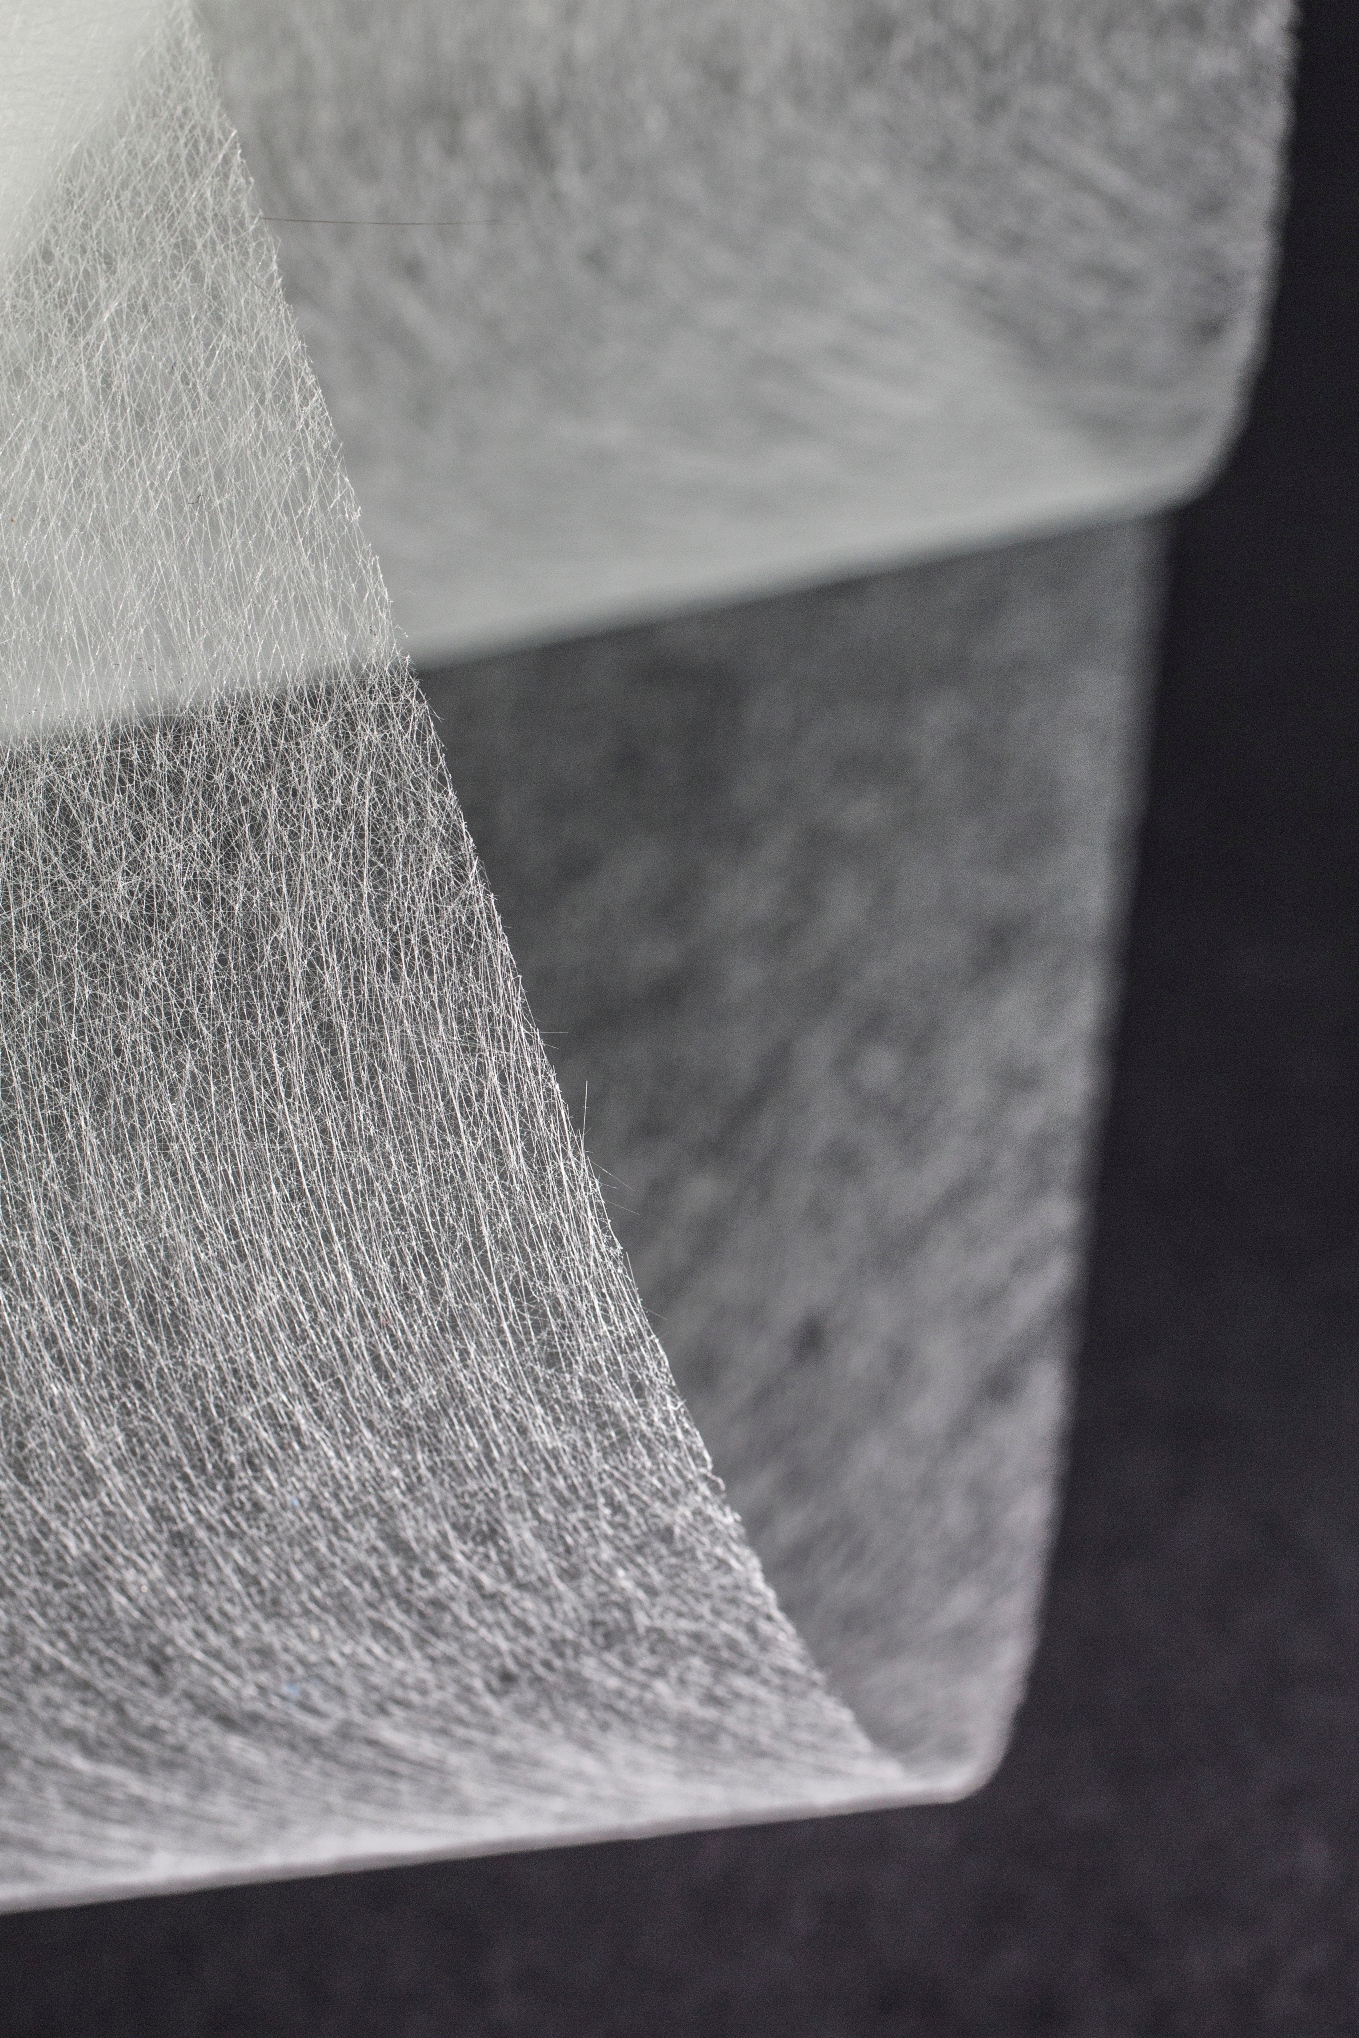 The full range of Optiveil and Optimat materials can help achieve a high quality surface finish.